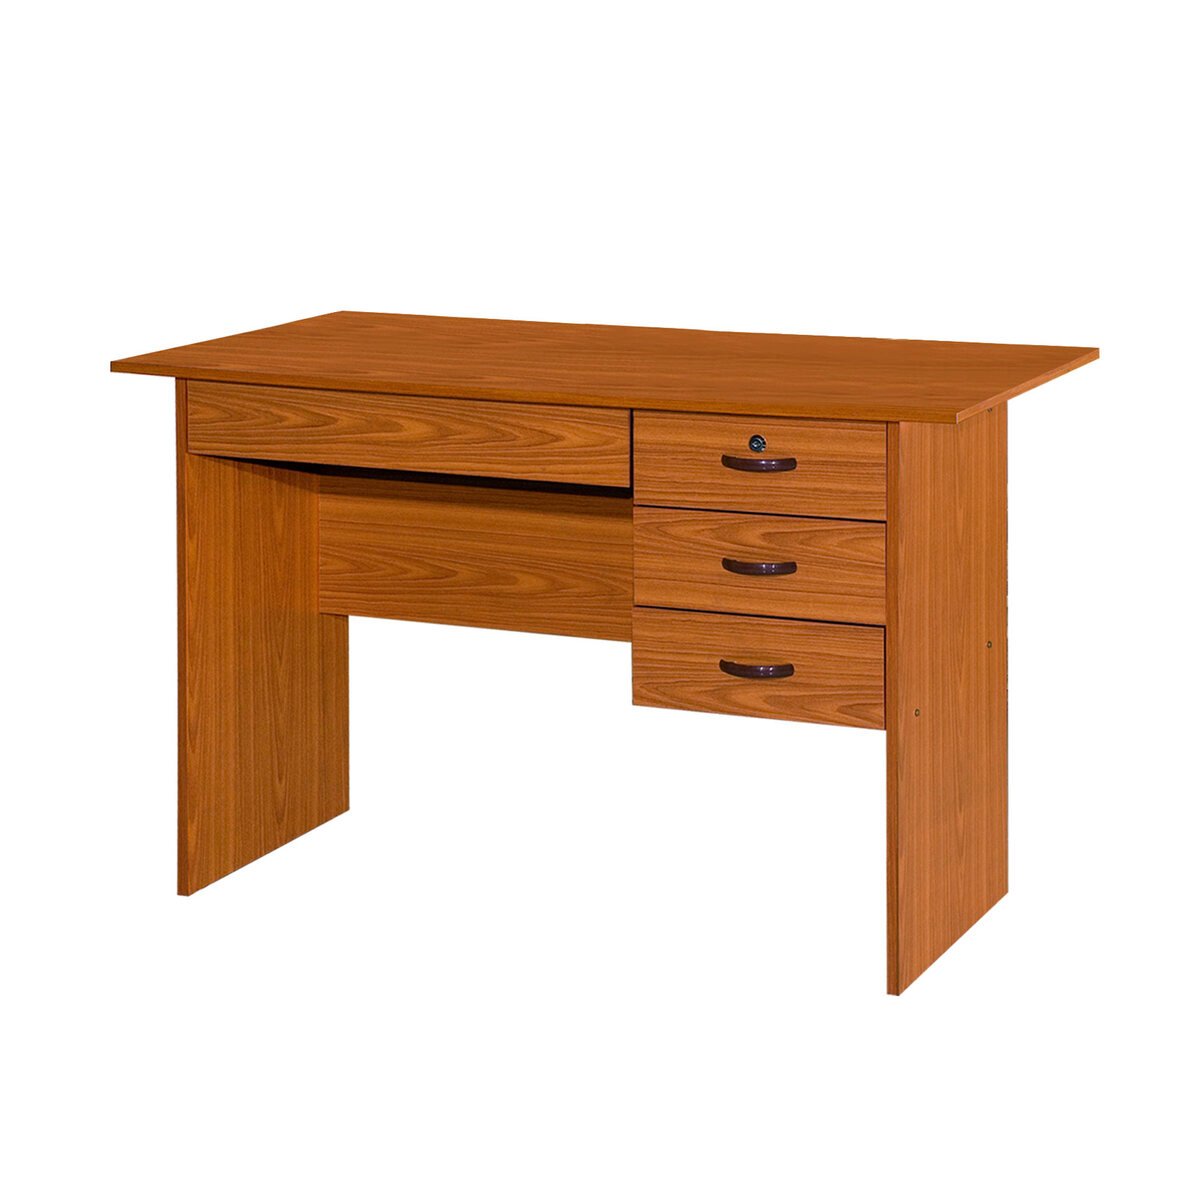 Maple Leaf Home Study Table 1302 Size: L117xW57xH72cm Wenge